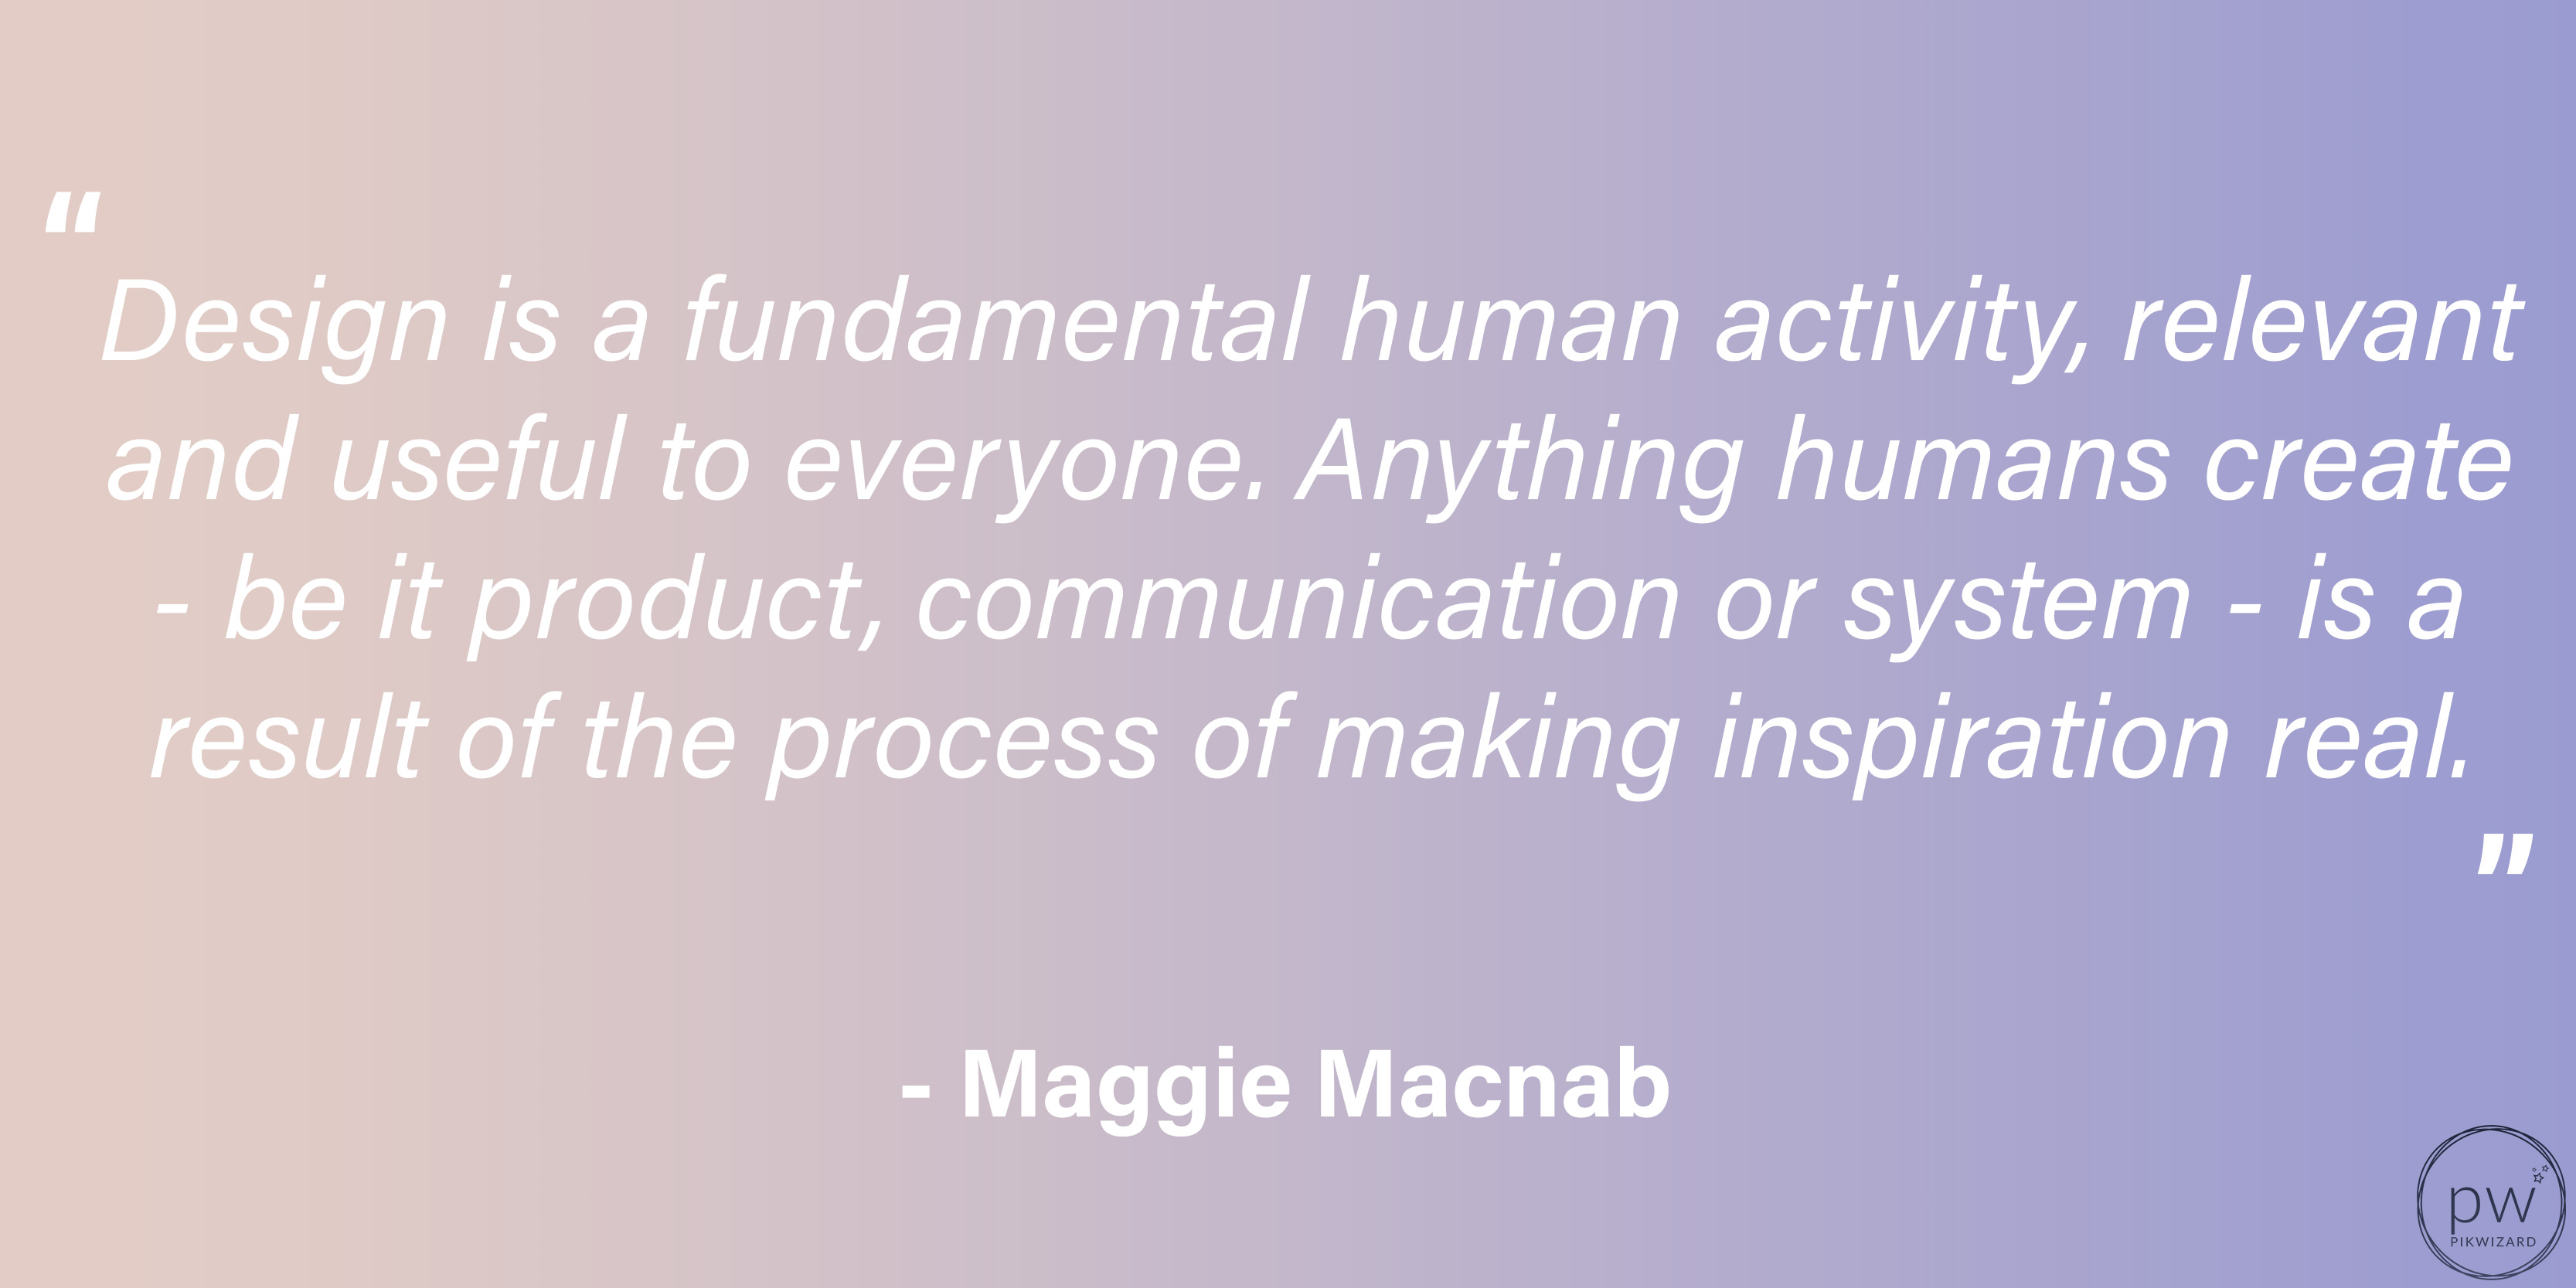 Maggie Macnab quote on a purple and pink gradient background